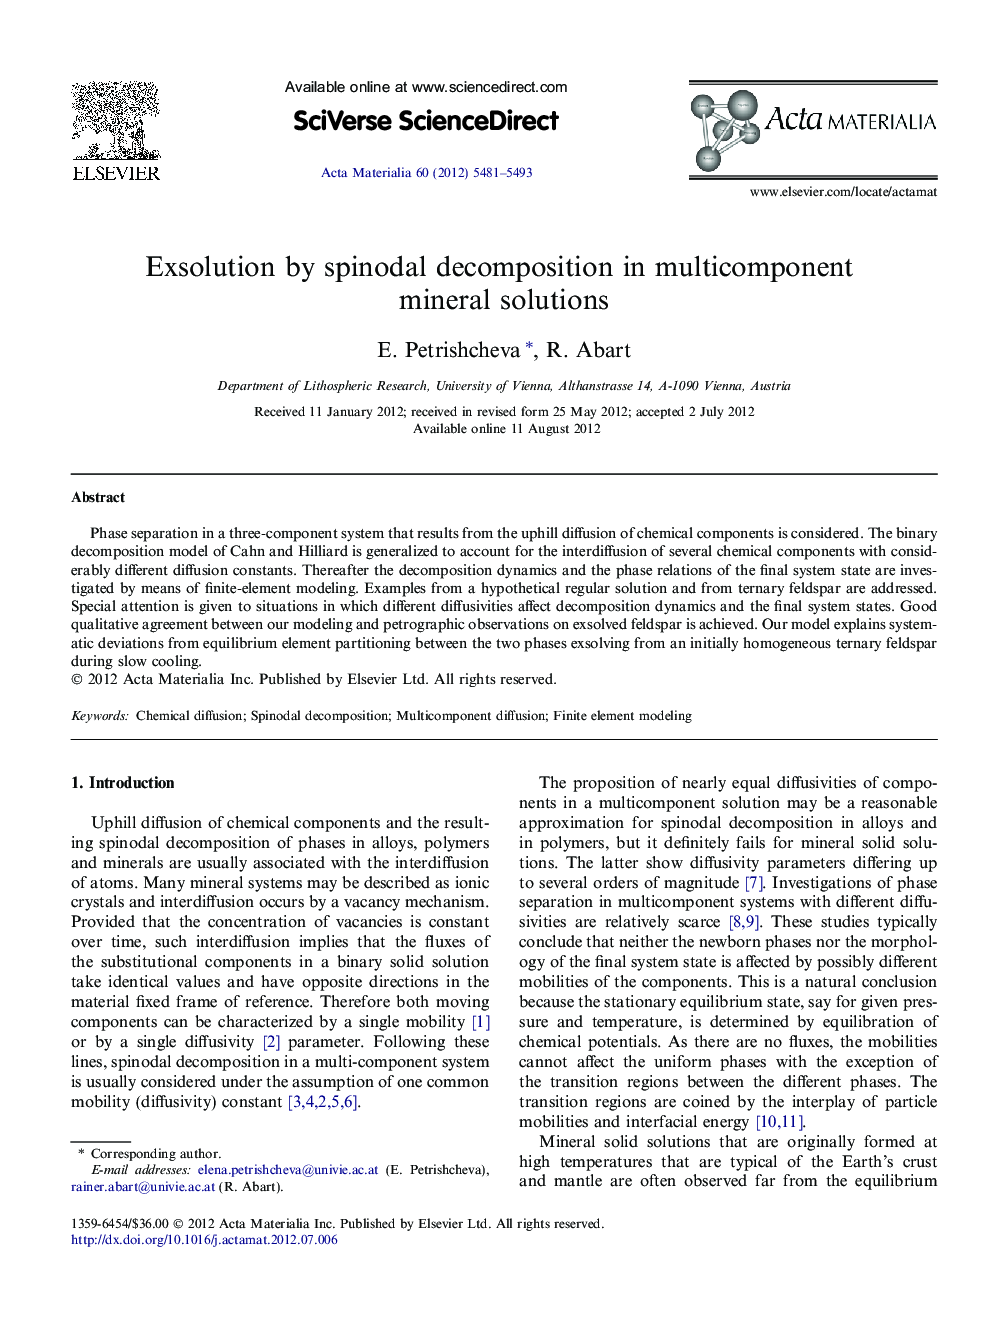 Exsolution by spinodal decomposition in multicomponent mineral solutions